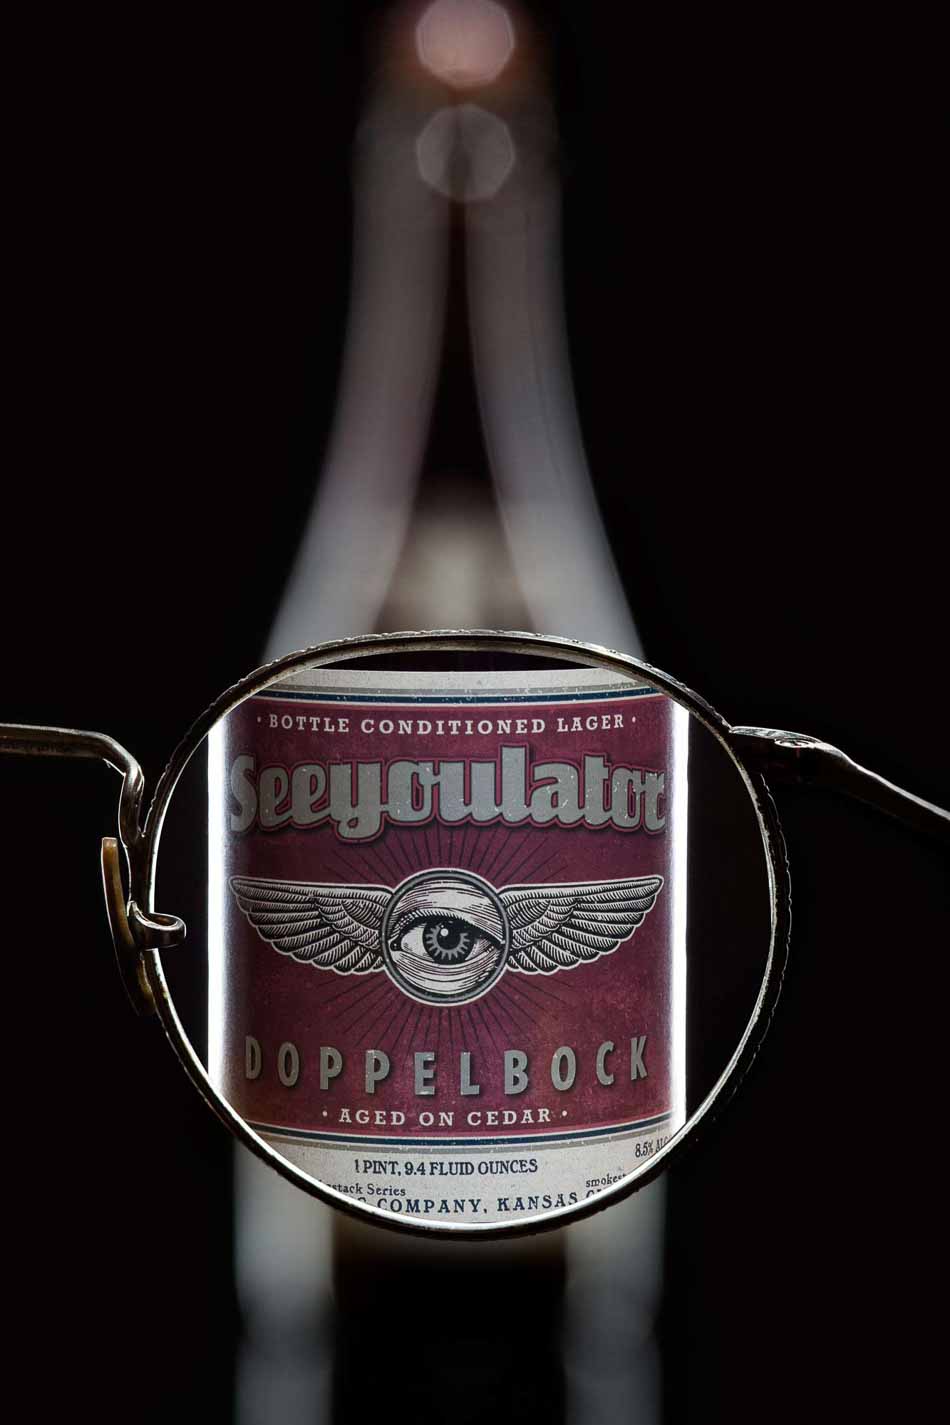 Looking through glasses lens making blurry beer bottle sharp - See You Later Doppelbock Cider | Bottle Photography | Dramatic Product Photography  | Still Life Photography | Shot in Denver, Colorado